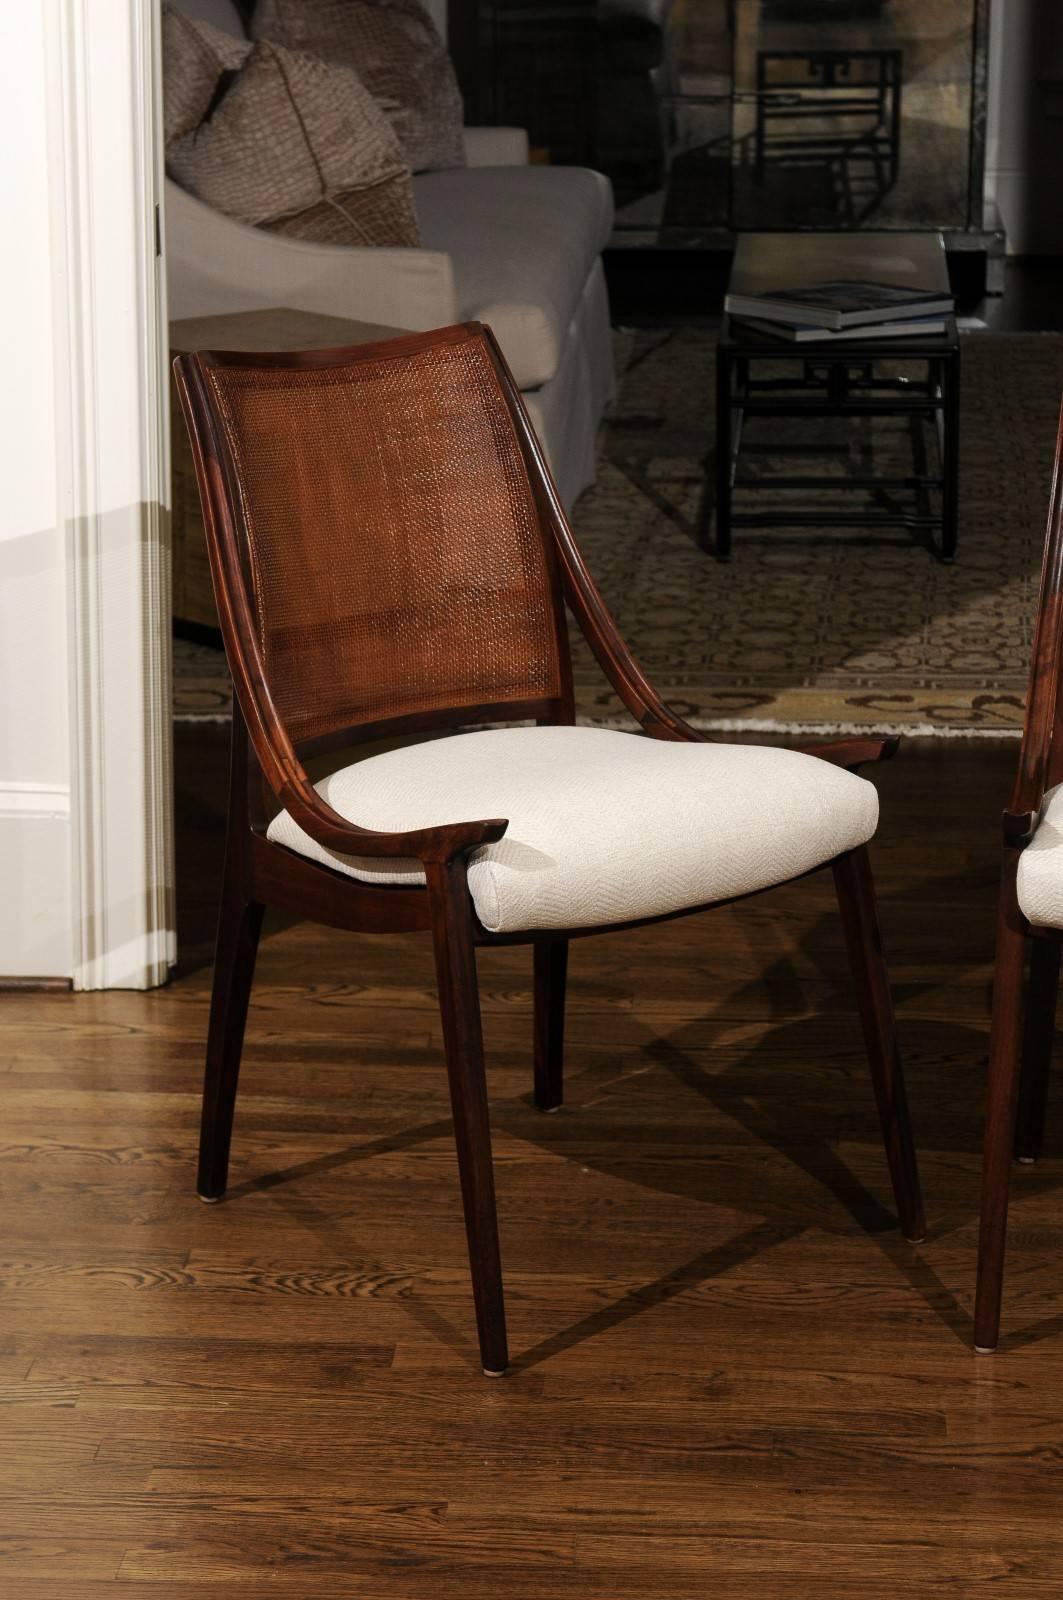 American Exquisite Set of Eight Cane Chairs by John Kapel for Glenn of California